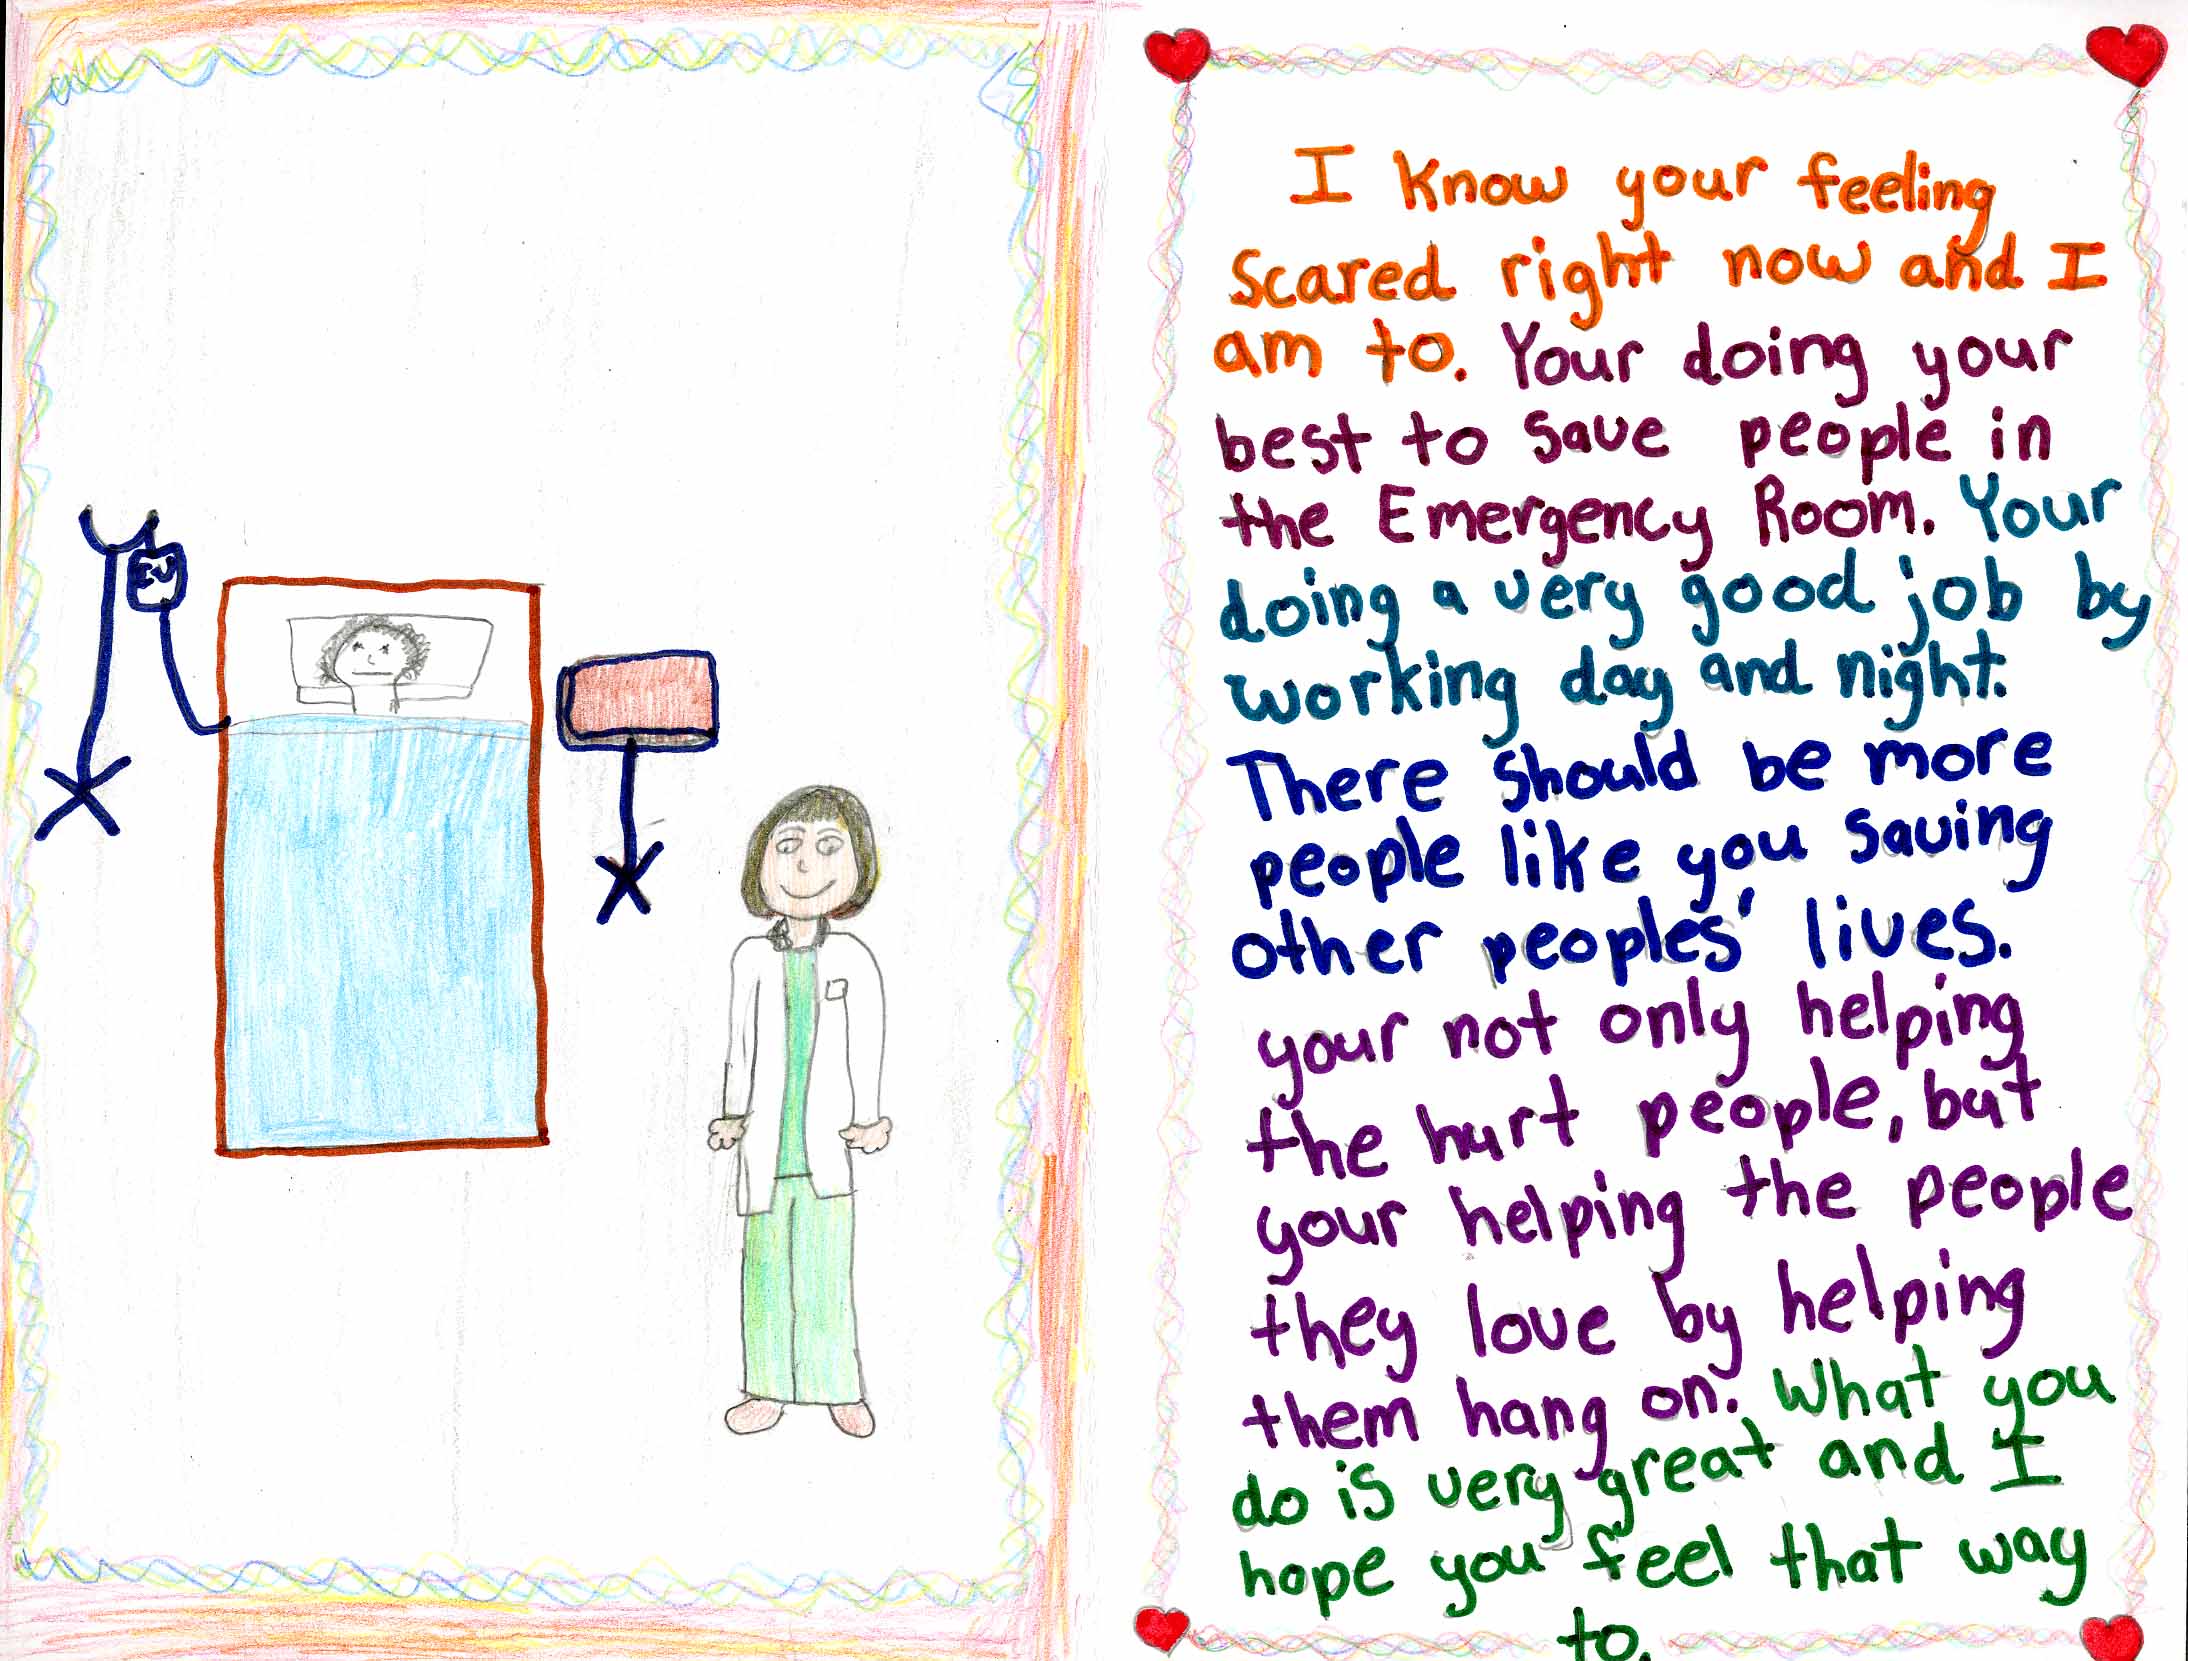 Children's card with handwritten message of hope and gratitude for doctors, with a drawing of a standing doctor next to a patient in bed.